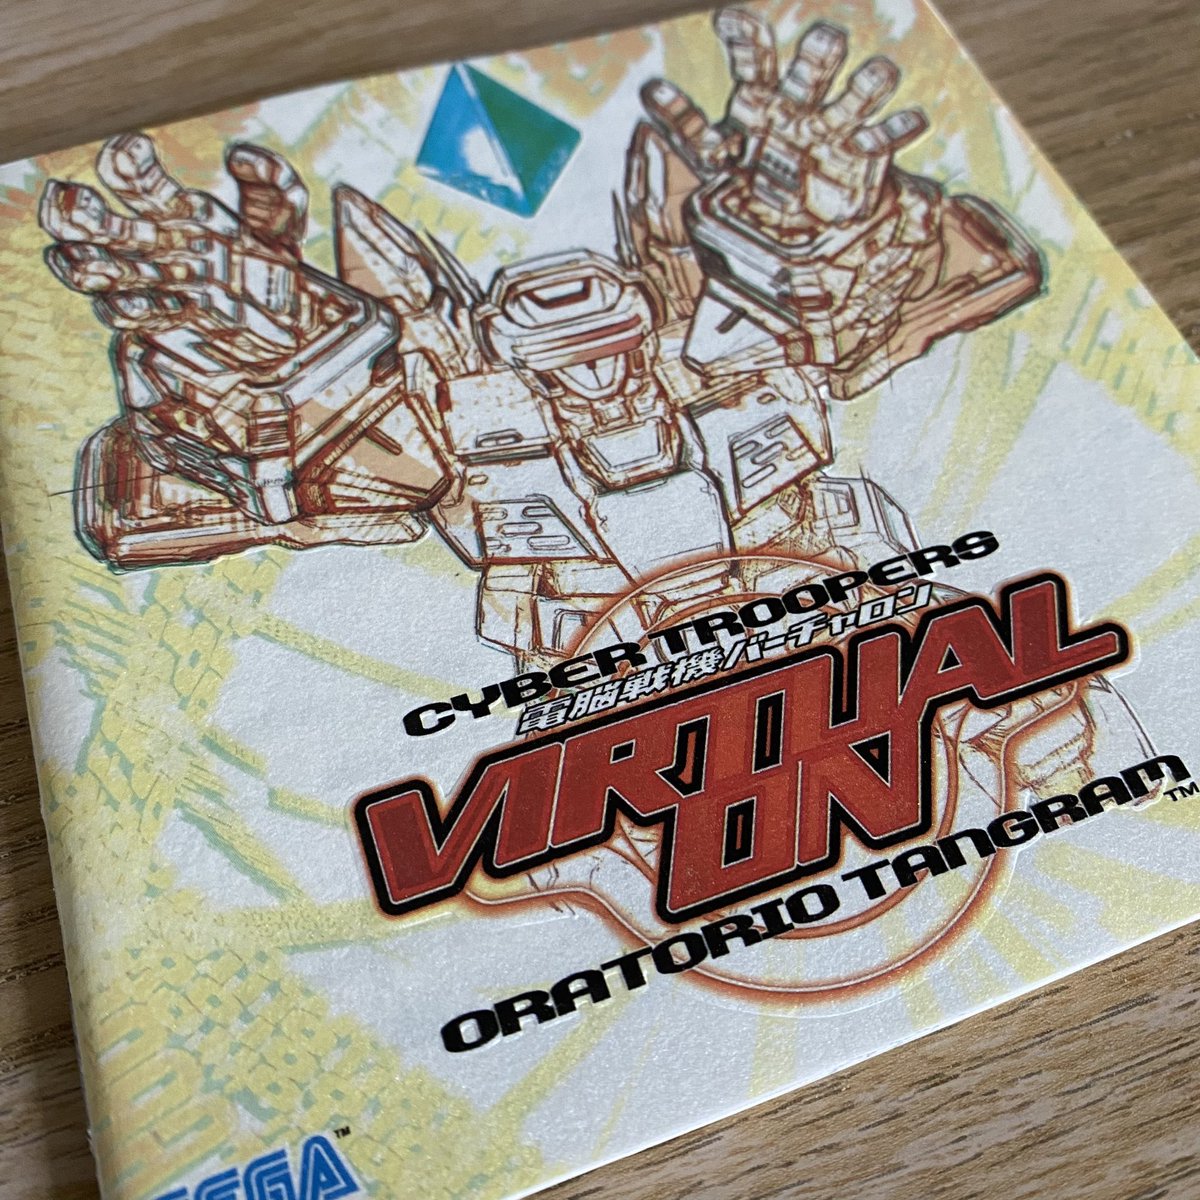 Had Virtual On for the Dreamcast delivered yesterday and I must say that it probably has the best instruction manuals I’ve ever seen. Not only is it a beautiful design but it’s also embossed. #itsthinkingthursdays #sega #ShareYourGames